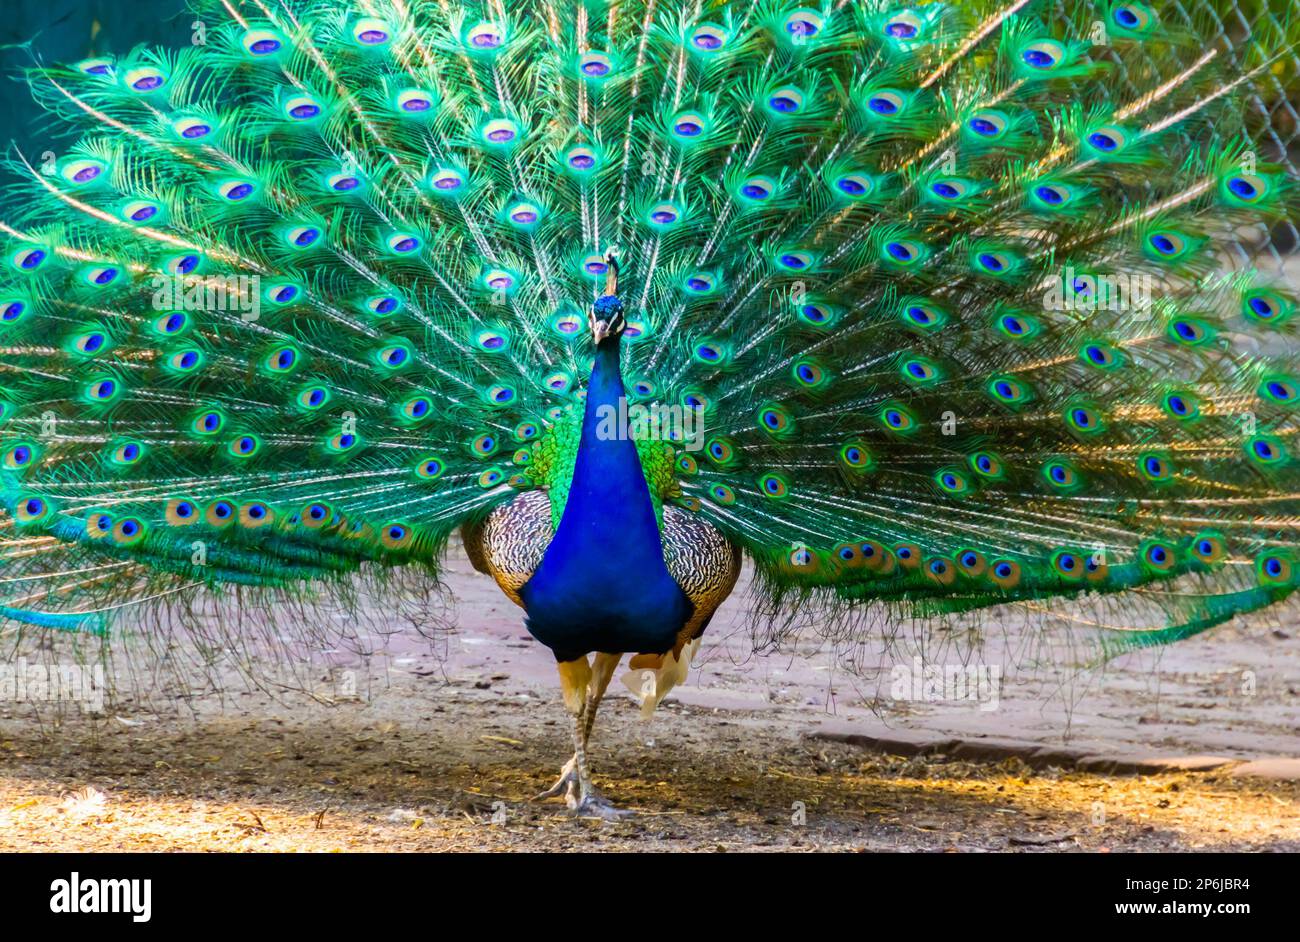 blue indian peafowl walking towards camera showing off its feathers, tropical bird specie from India Stock Photo